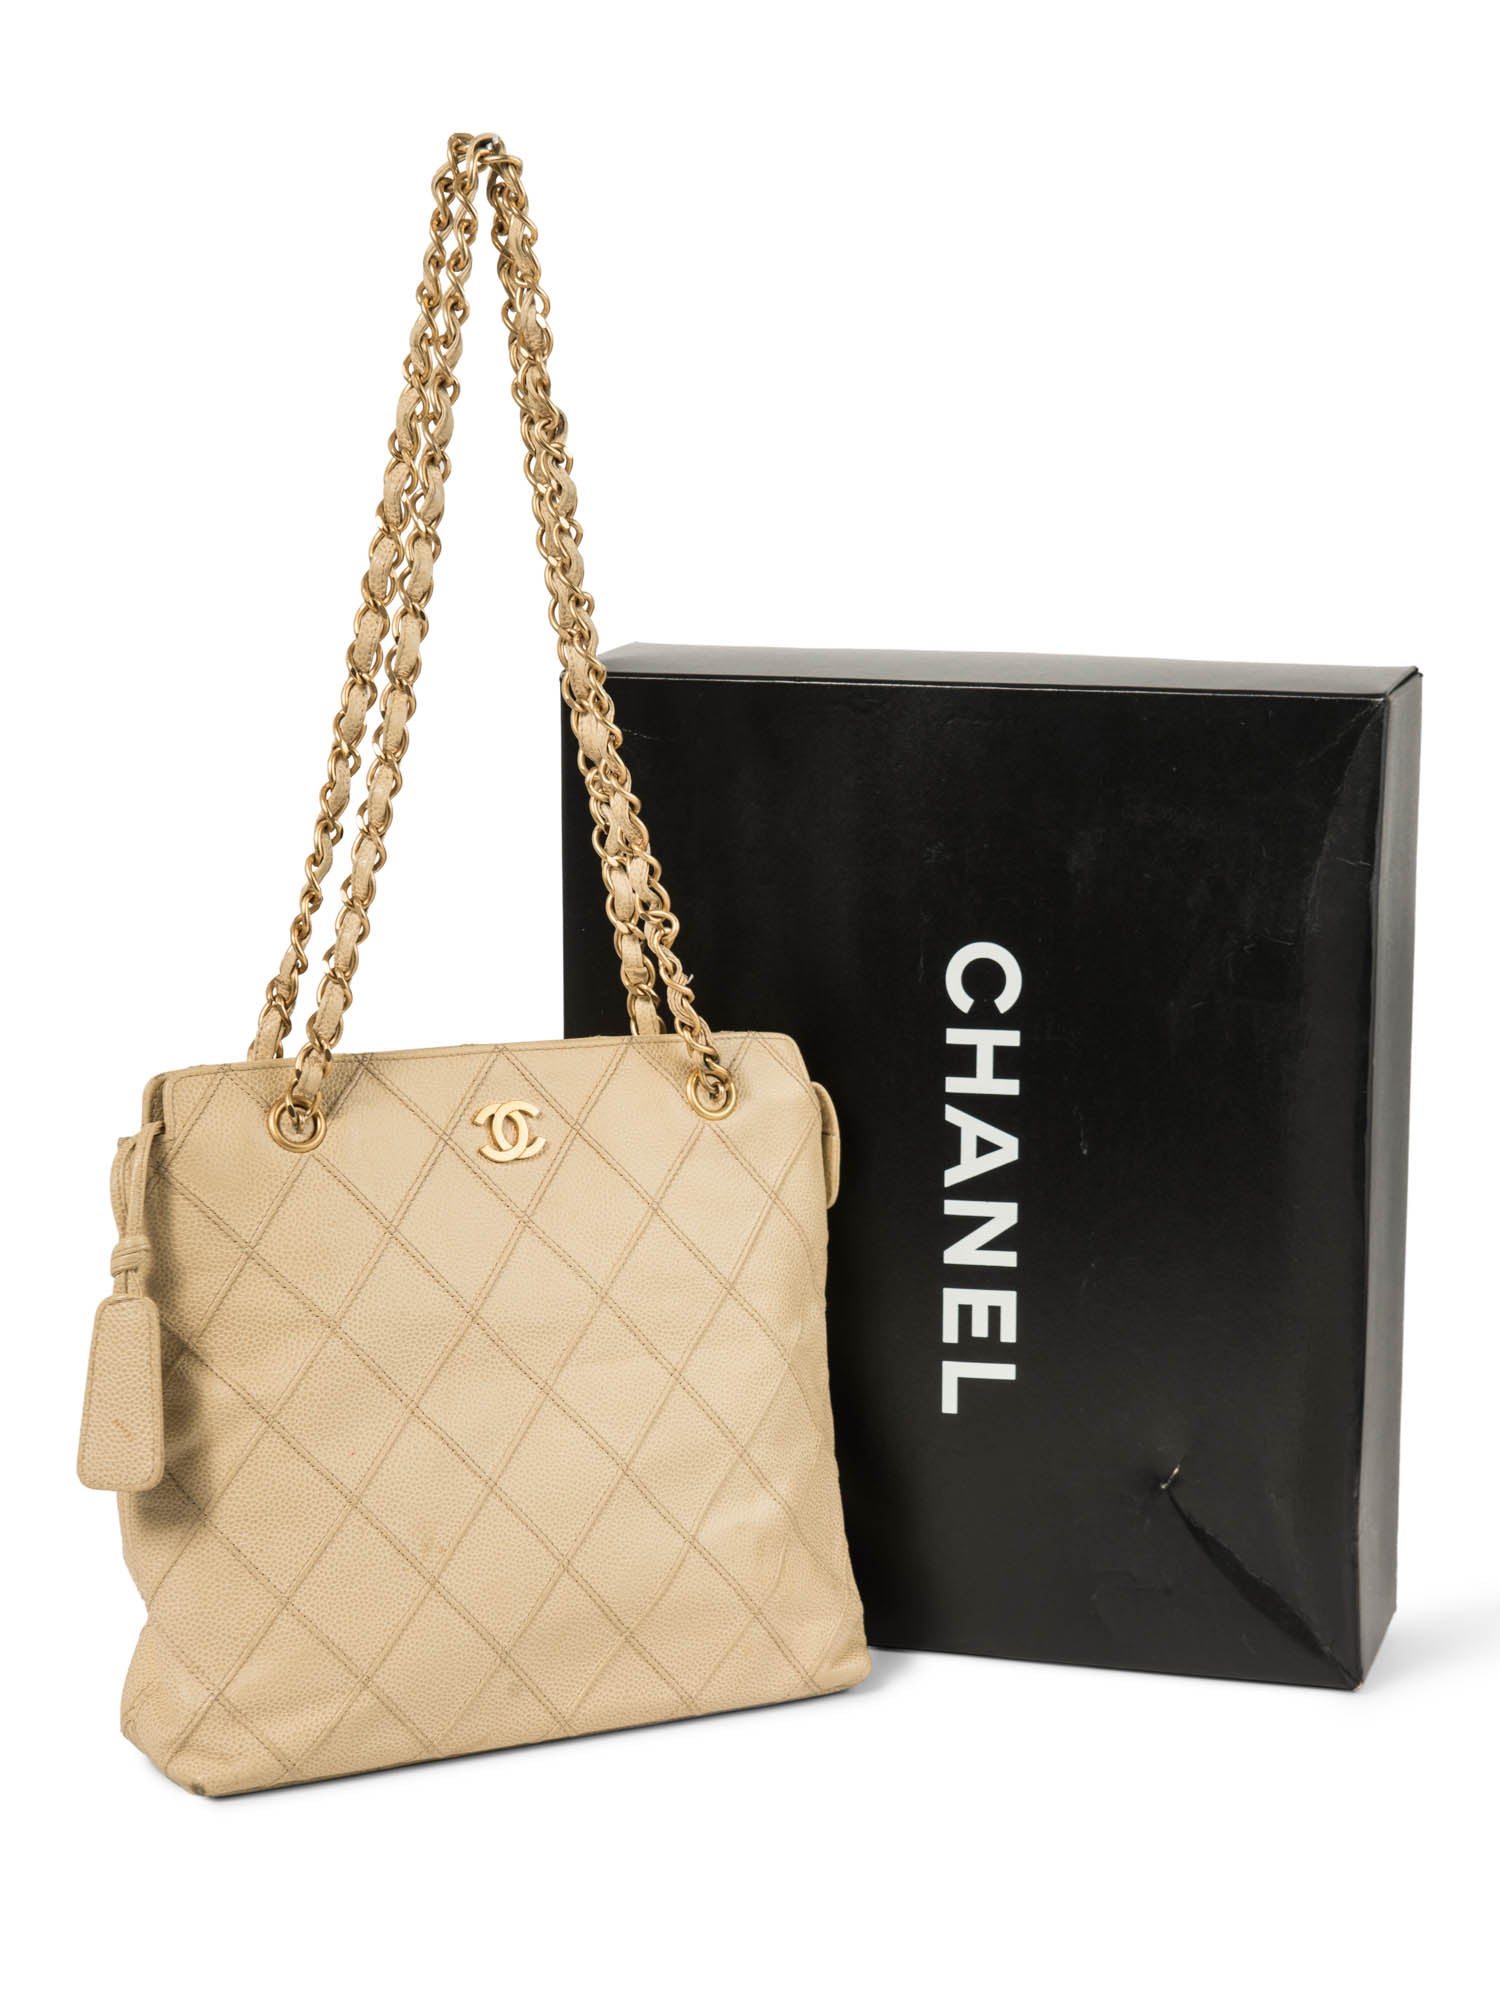 CHANEL CC Logo Caviar Leather Quilted Shopper Bag Ivory Gold